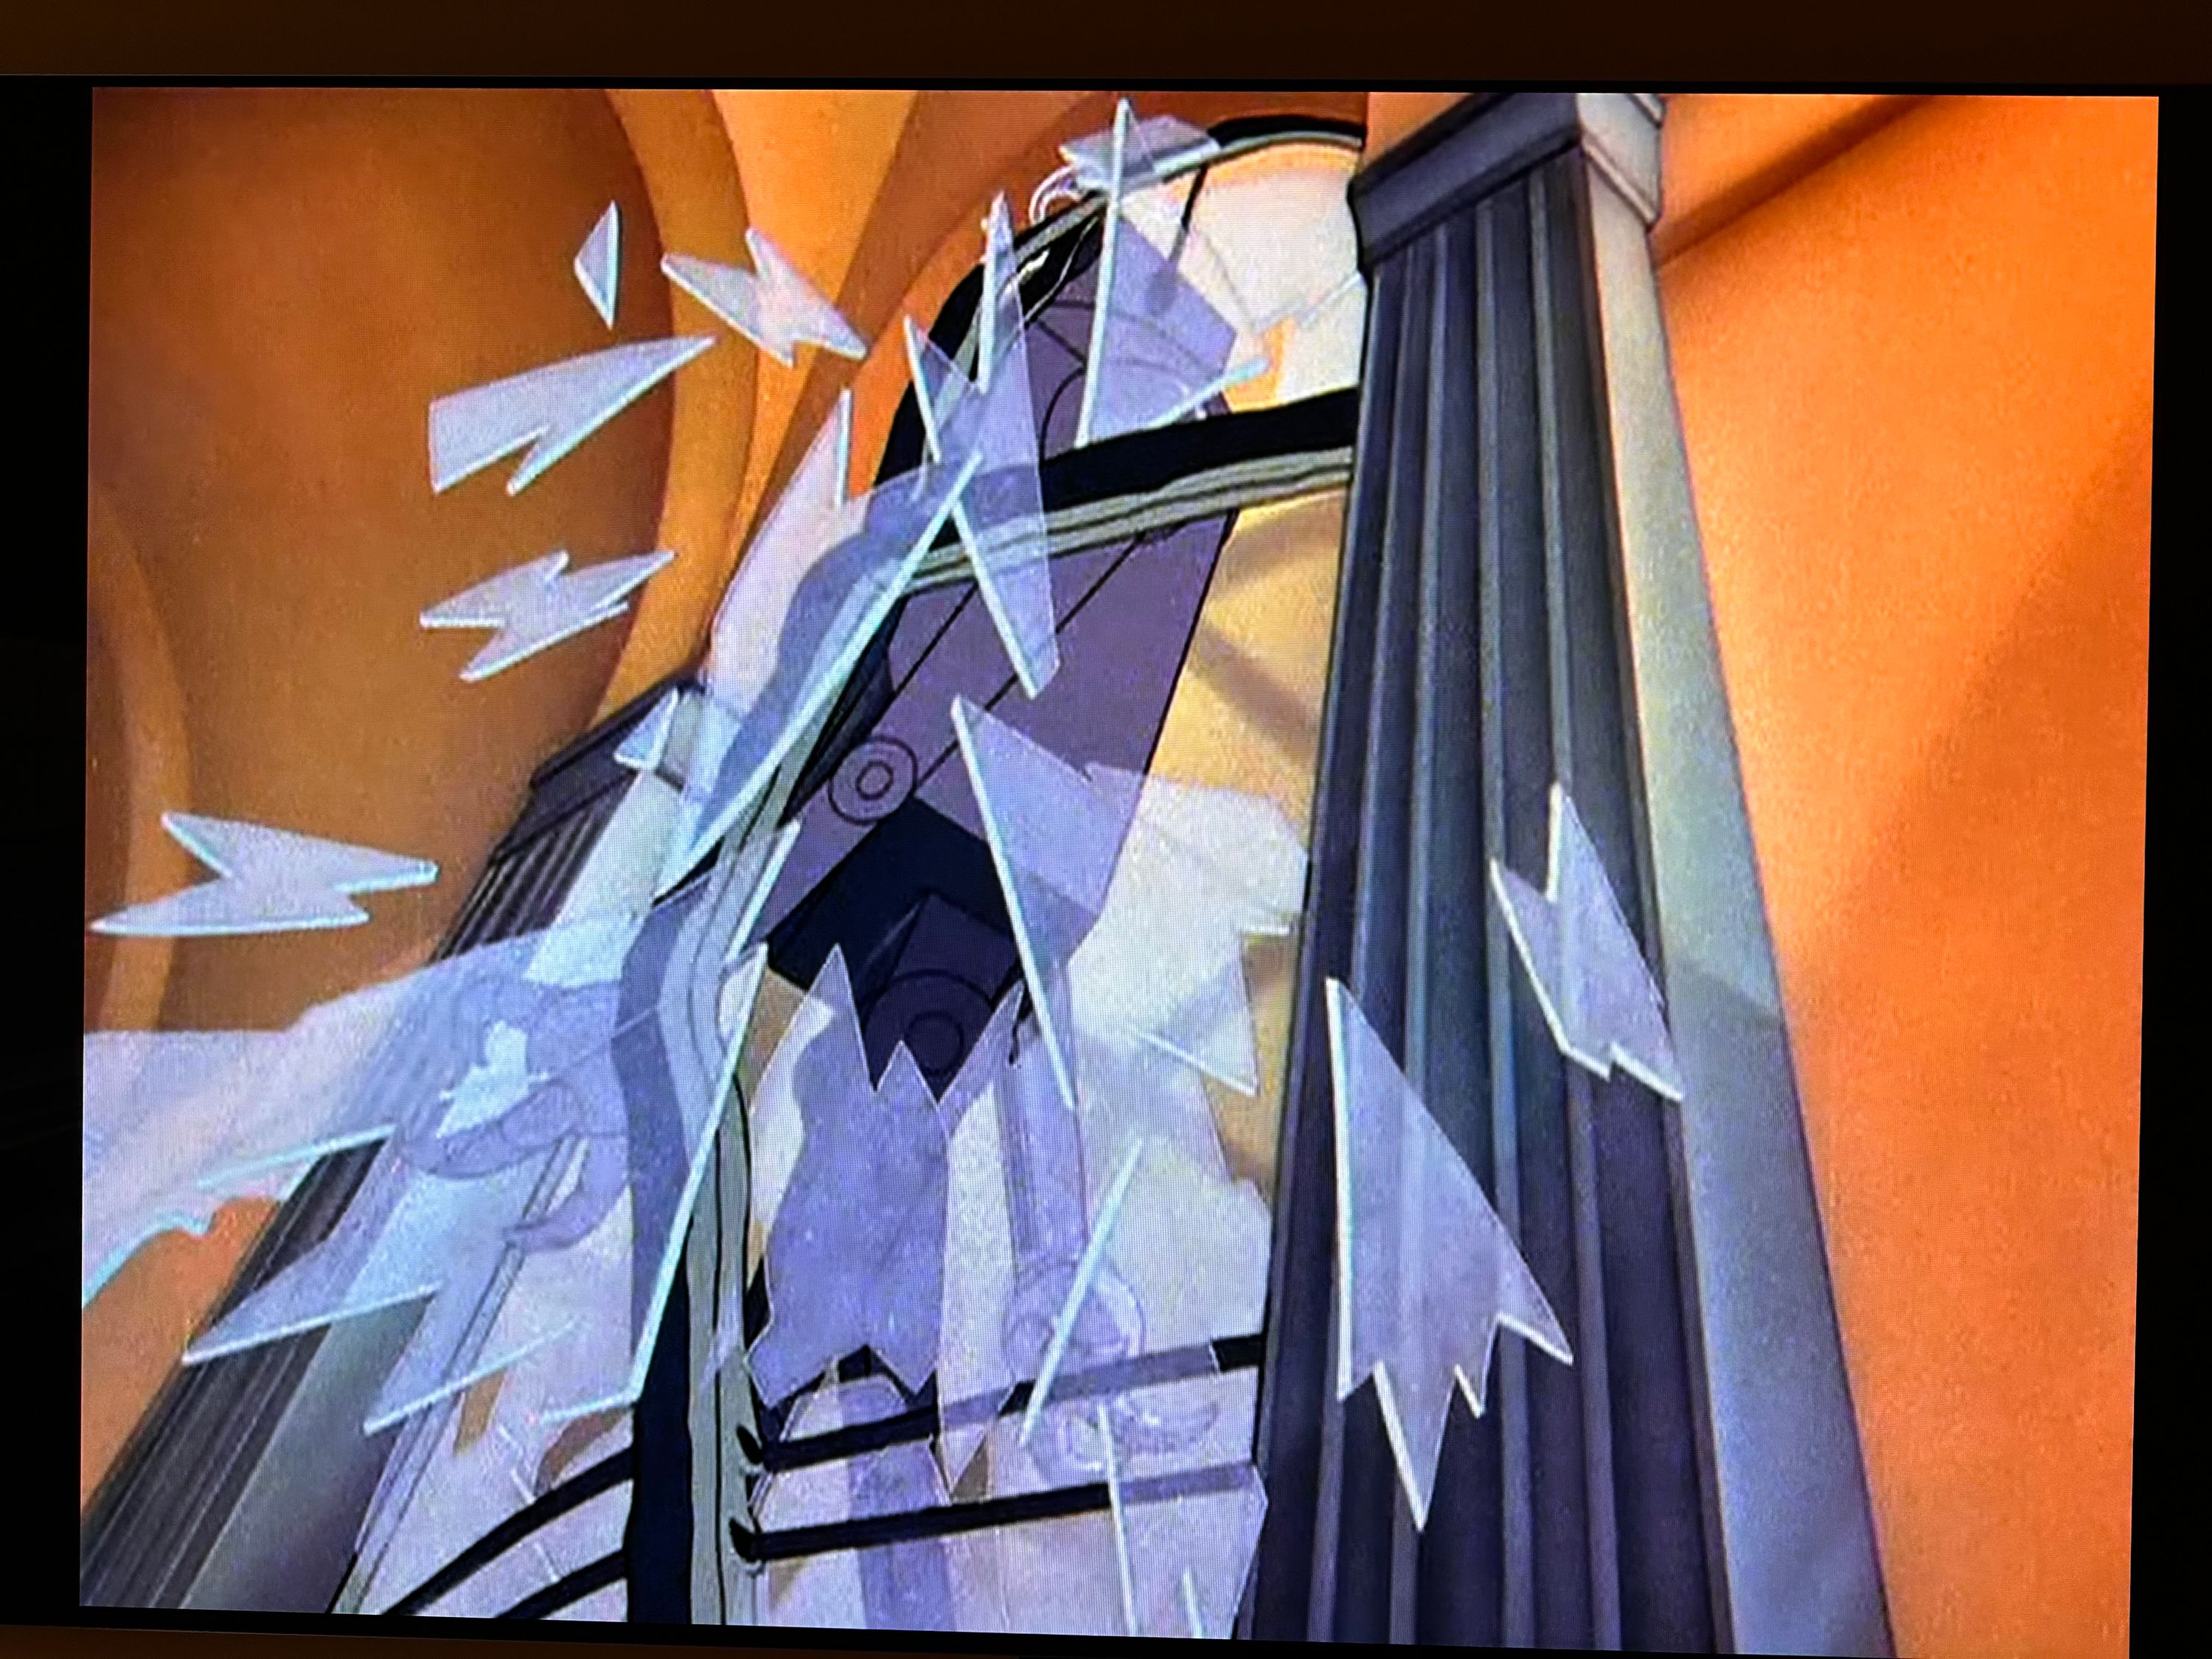 A robot bursting through a glass window from the official DVD